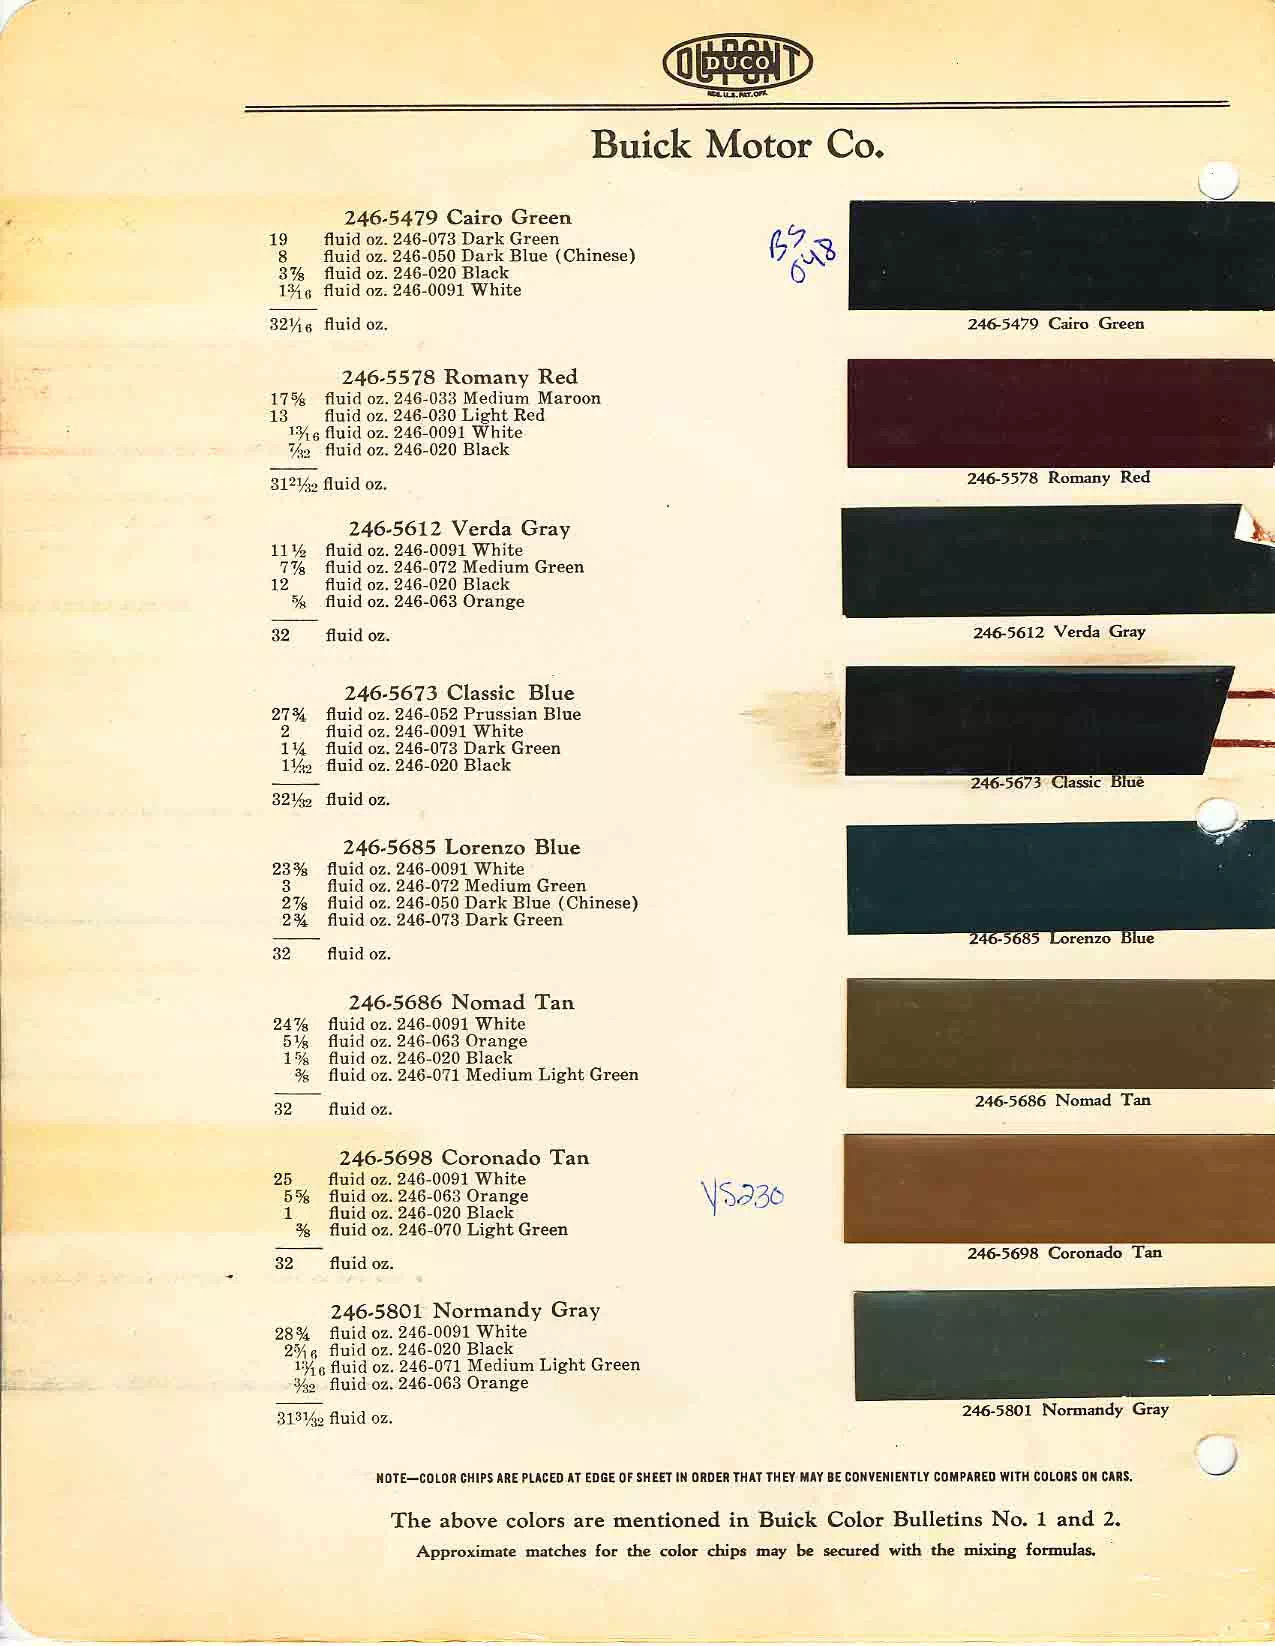 colors and ordering codes for those colors used on 1930 vehicles